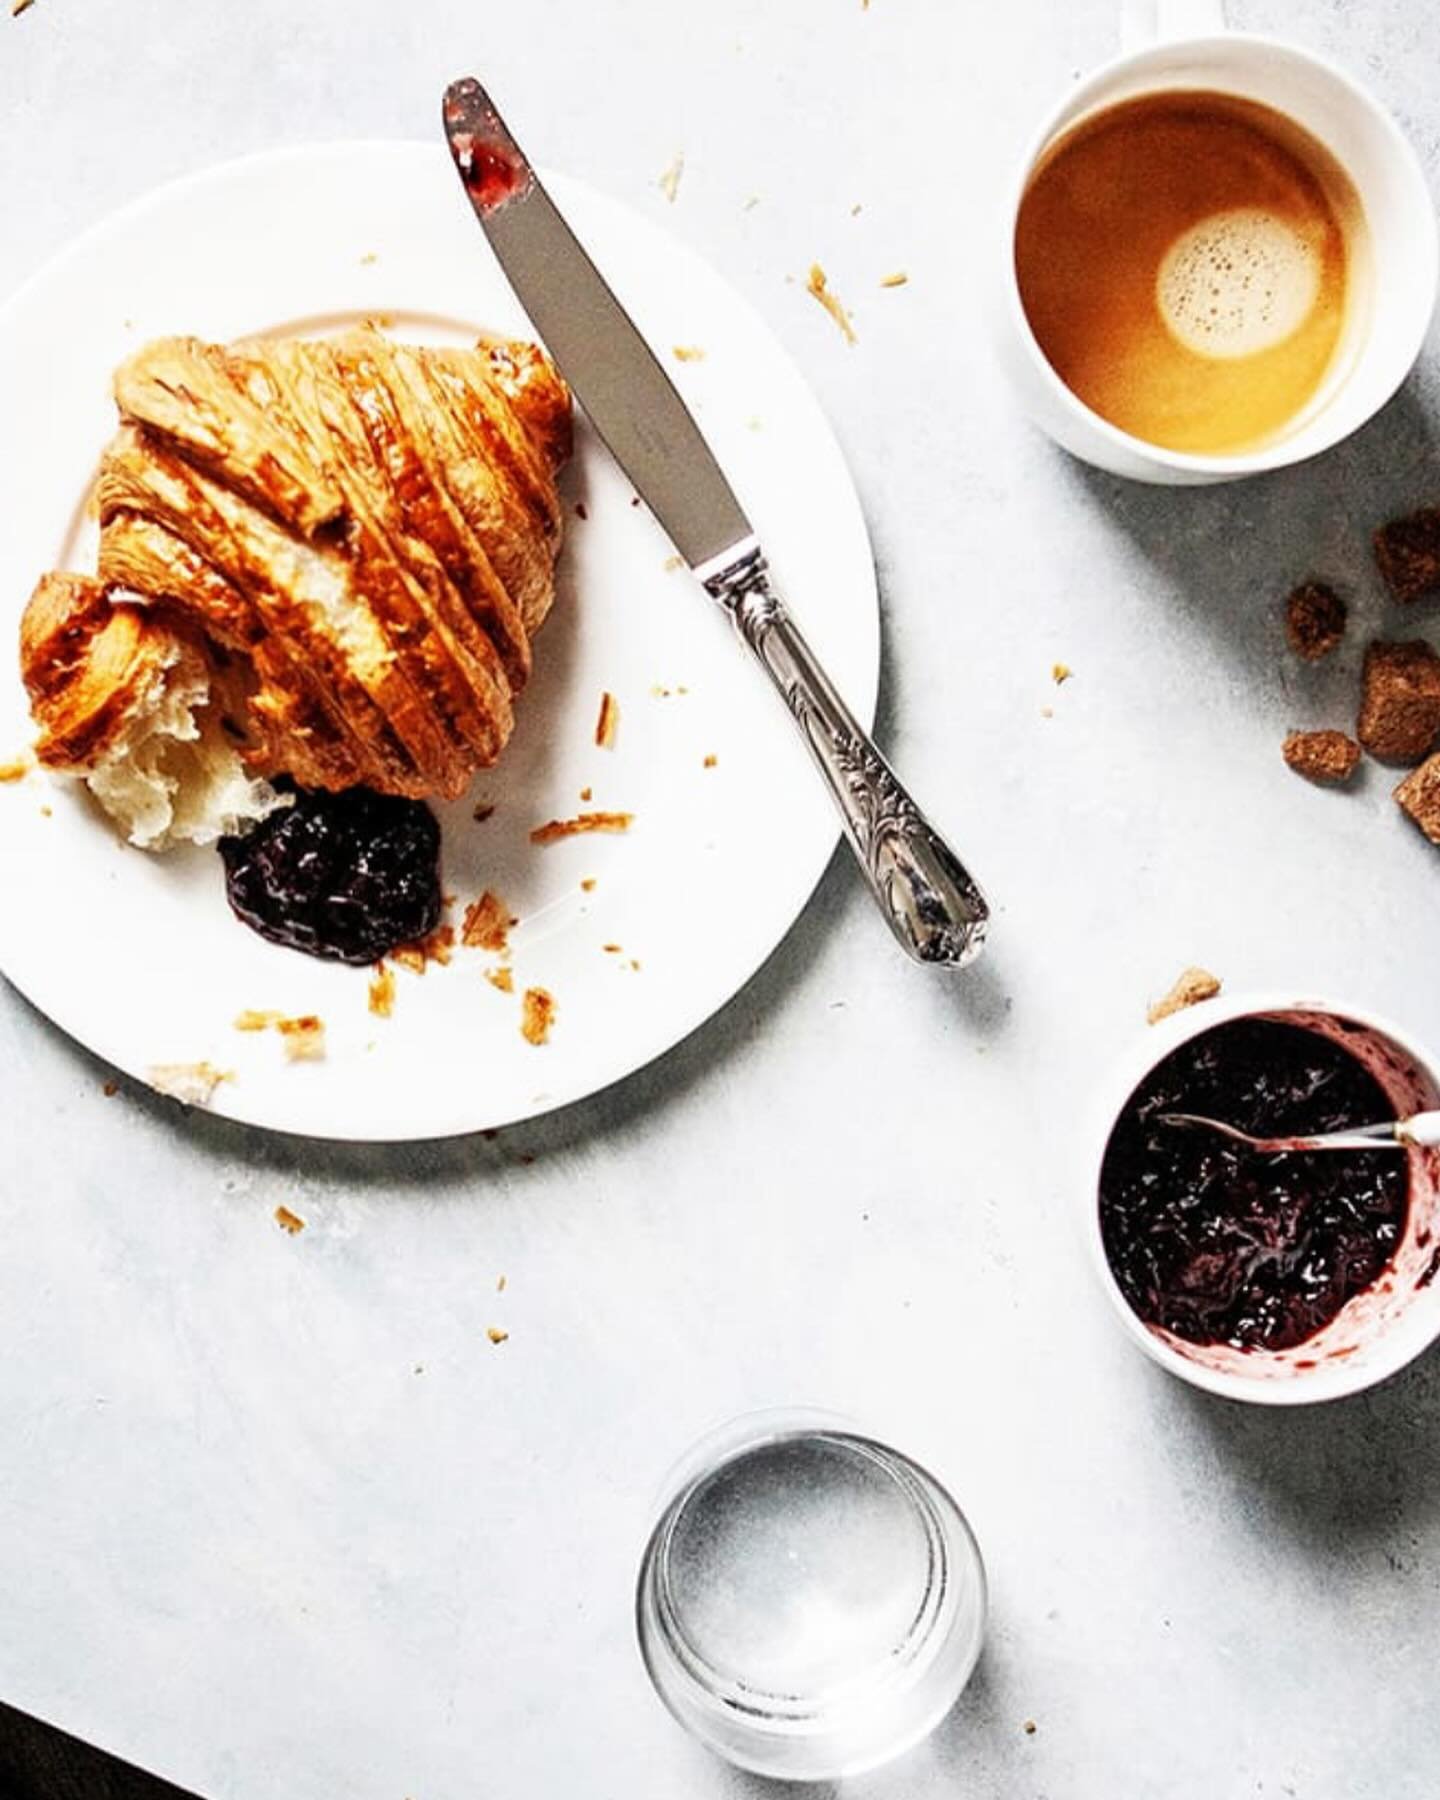 BEAUTIFUL FOOD BY DESIGN | Freshly made jam spread on a warm crispy croissant flanked by an espresso is an Italian way to greet La matina, in Italian &lsquo;the morning.&rsquo; Anytime of day we can carve out for ourselves, quiet intention, even bett